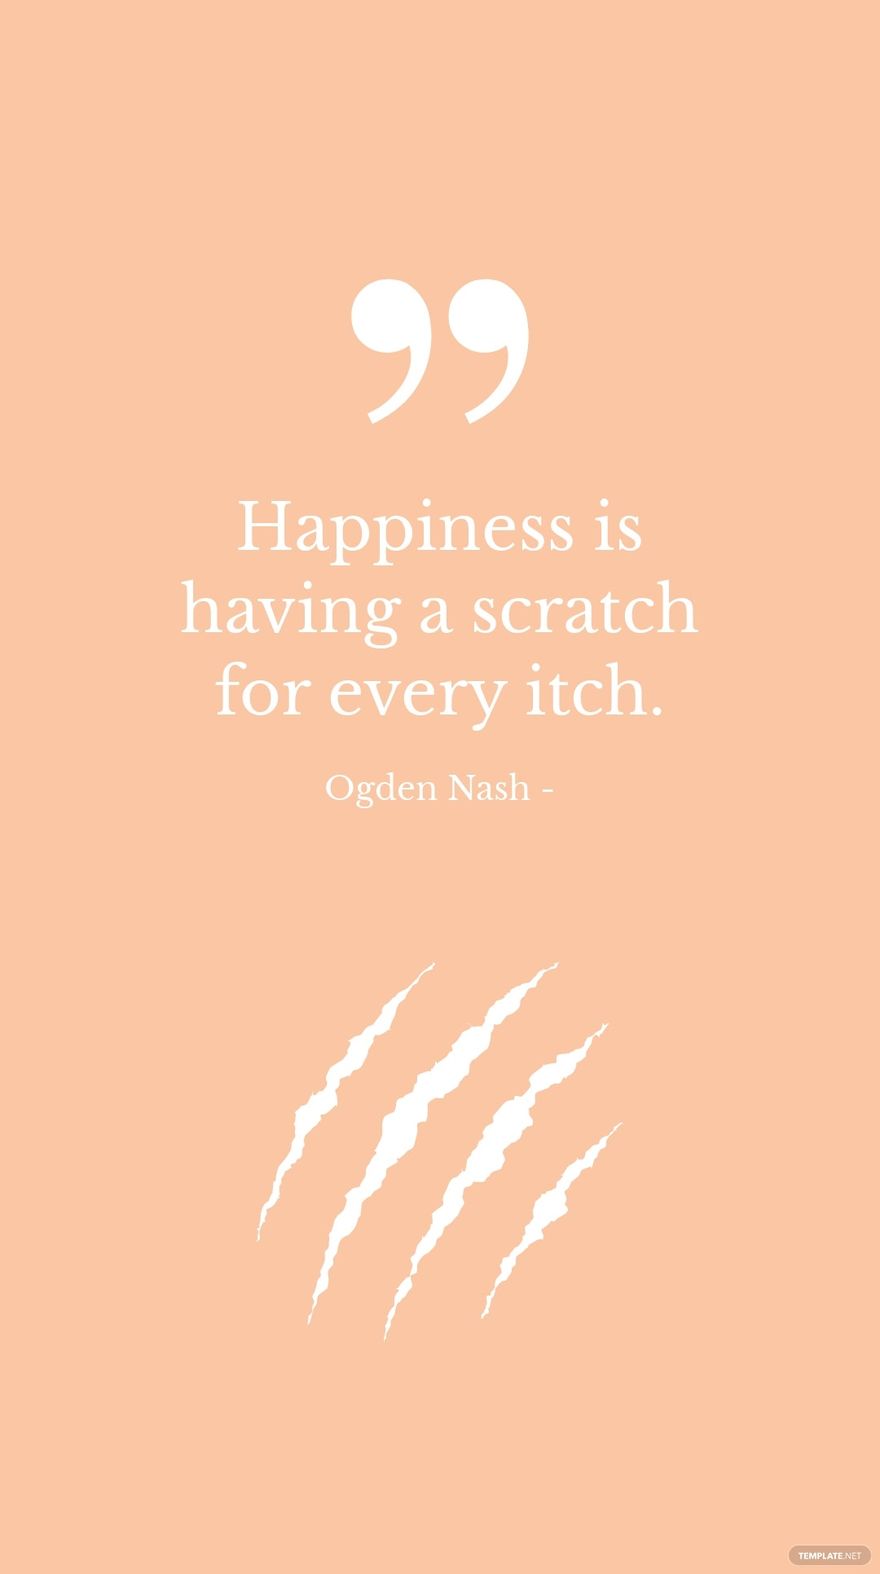 Ogden Nash - Happiness is having a scratch for every itch.